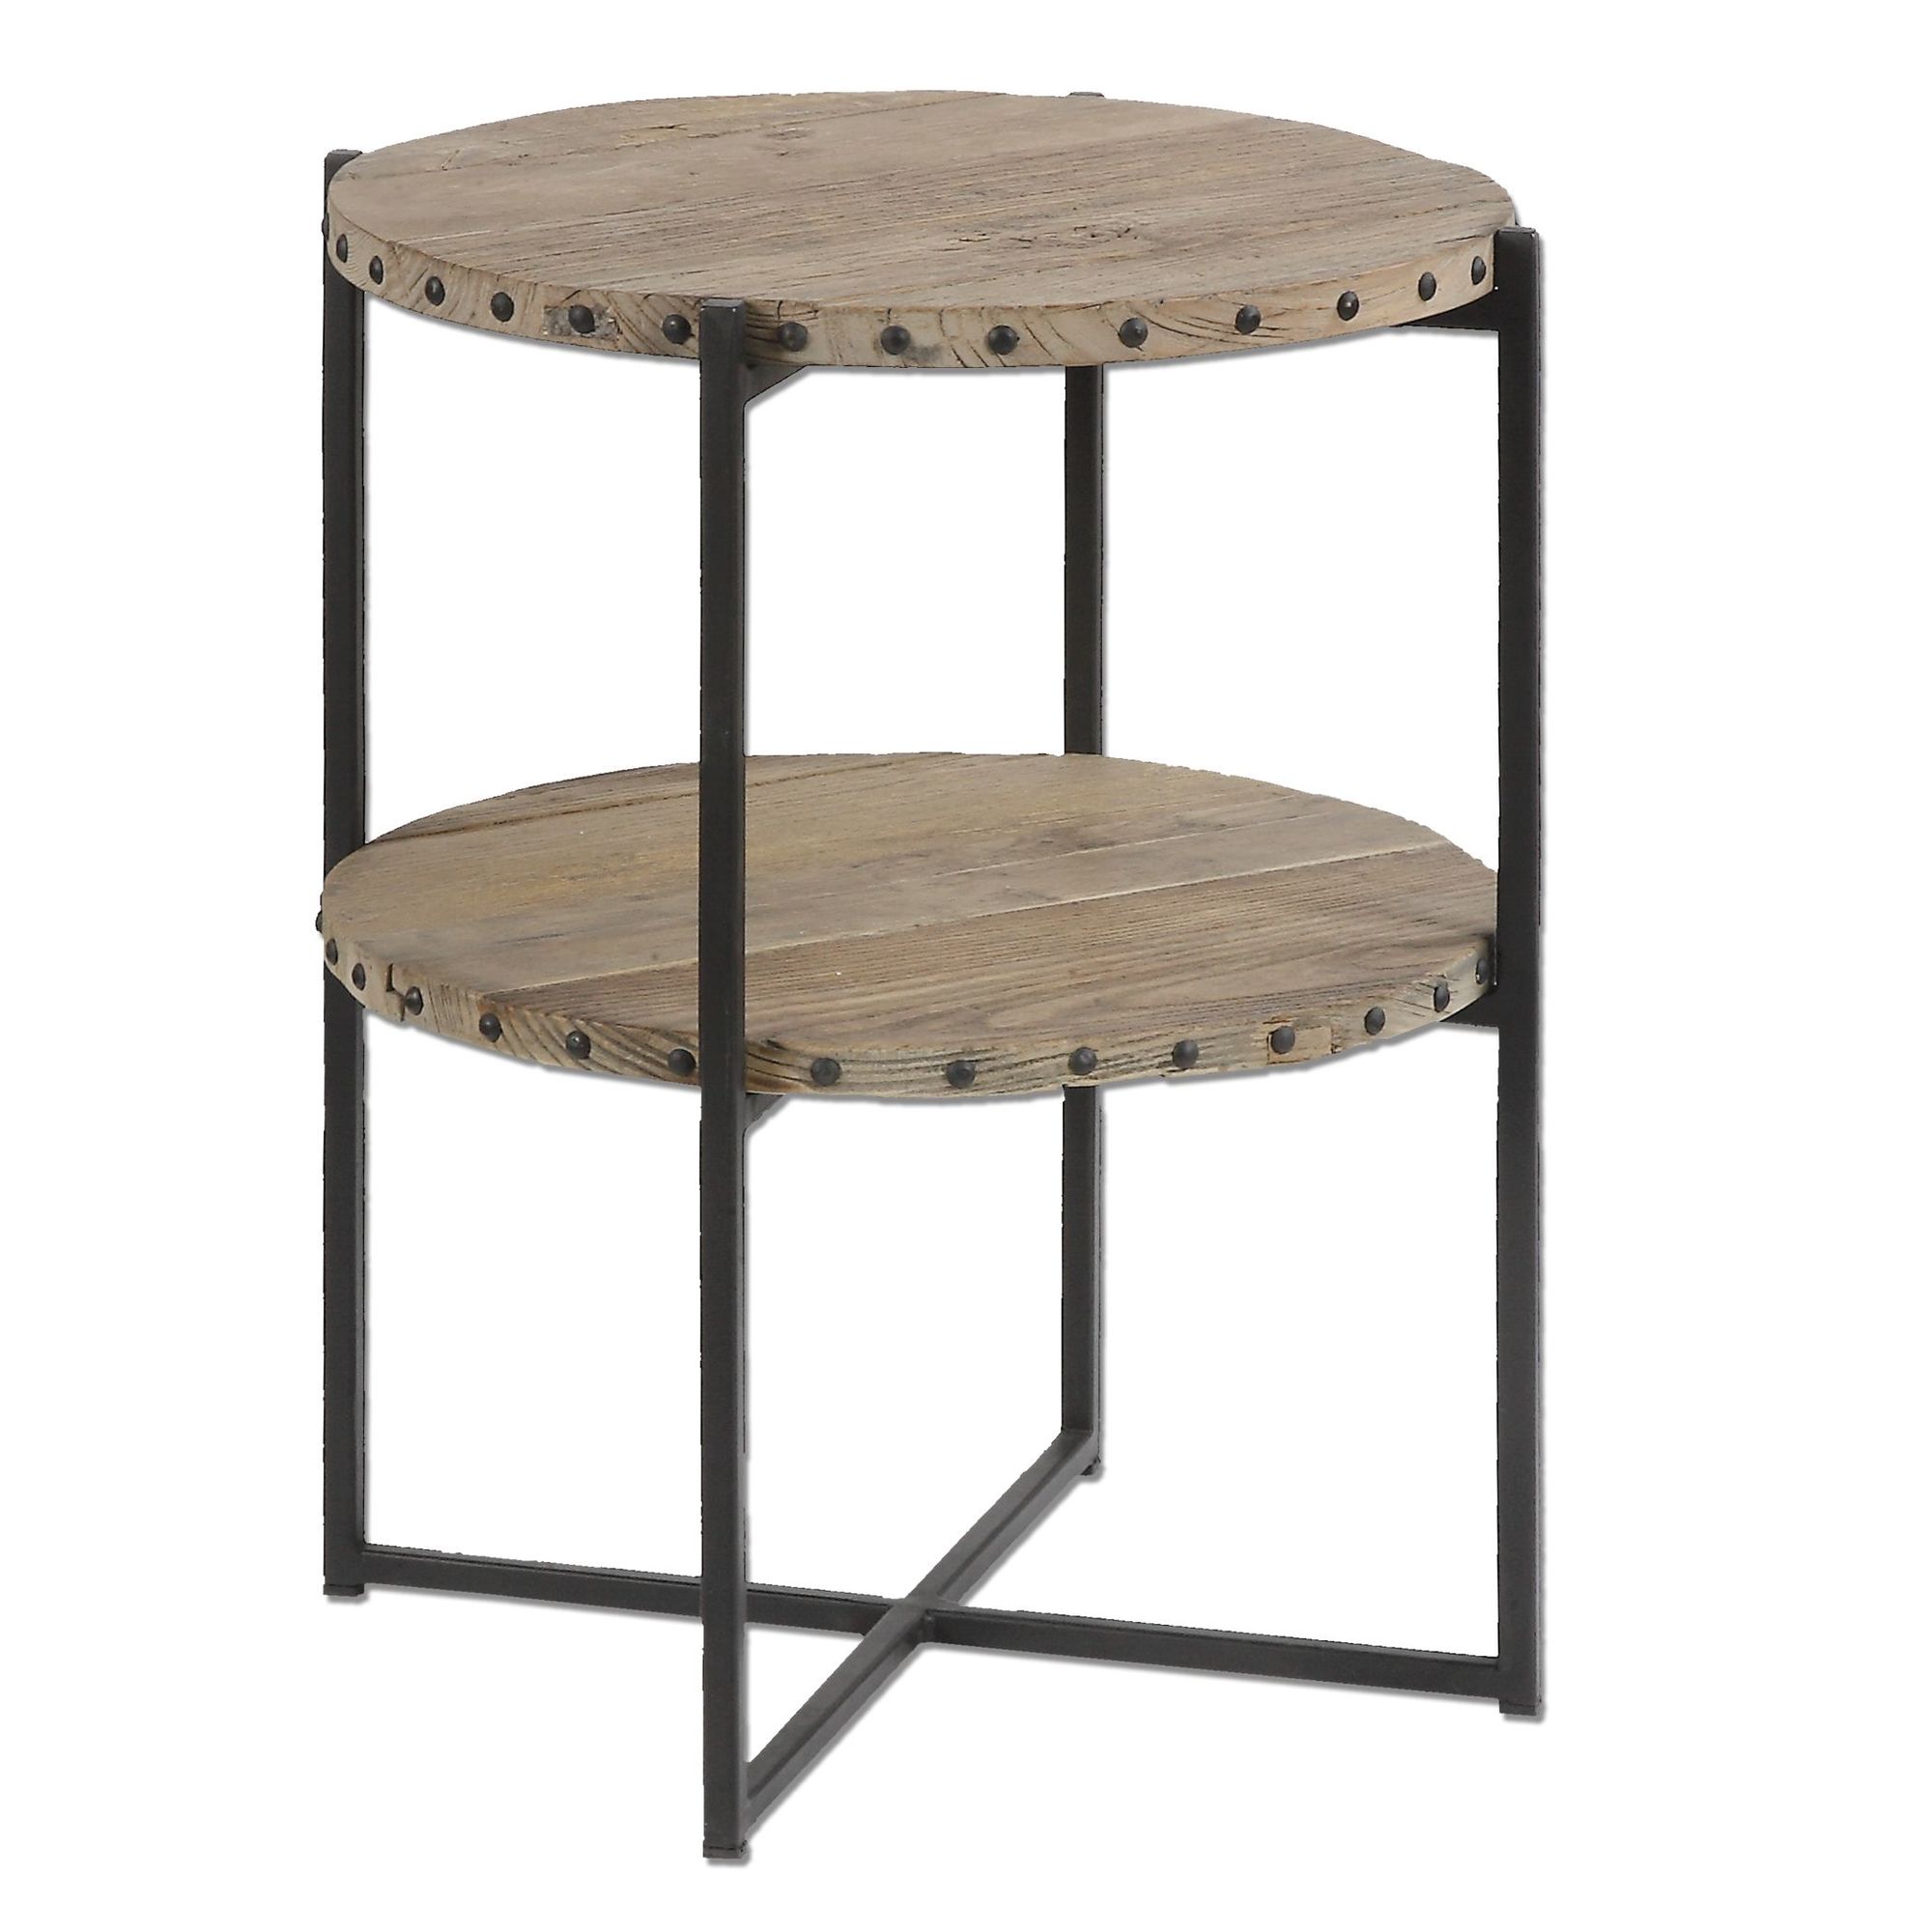 double layered round accent table gray mathis brothers furniture bourse legs for outdoor top covers wood coffee with drawers red home accents hampton bay patio set pier one